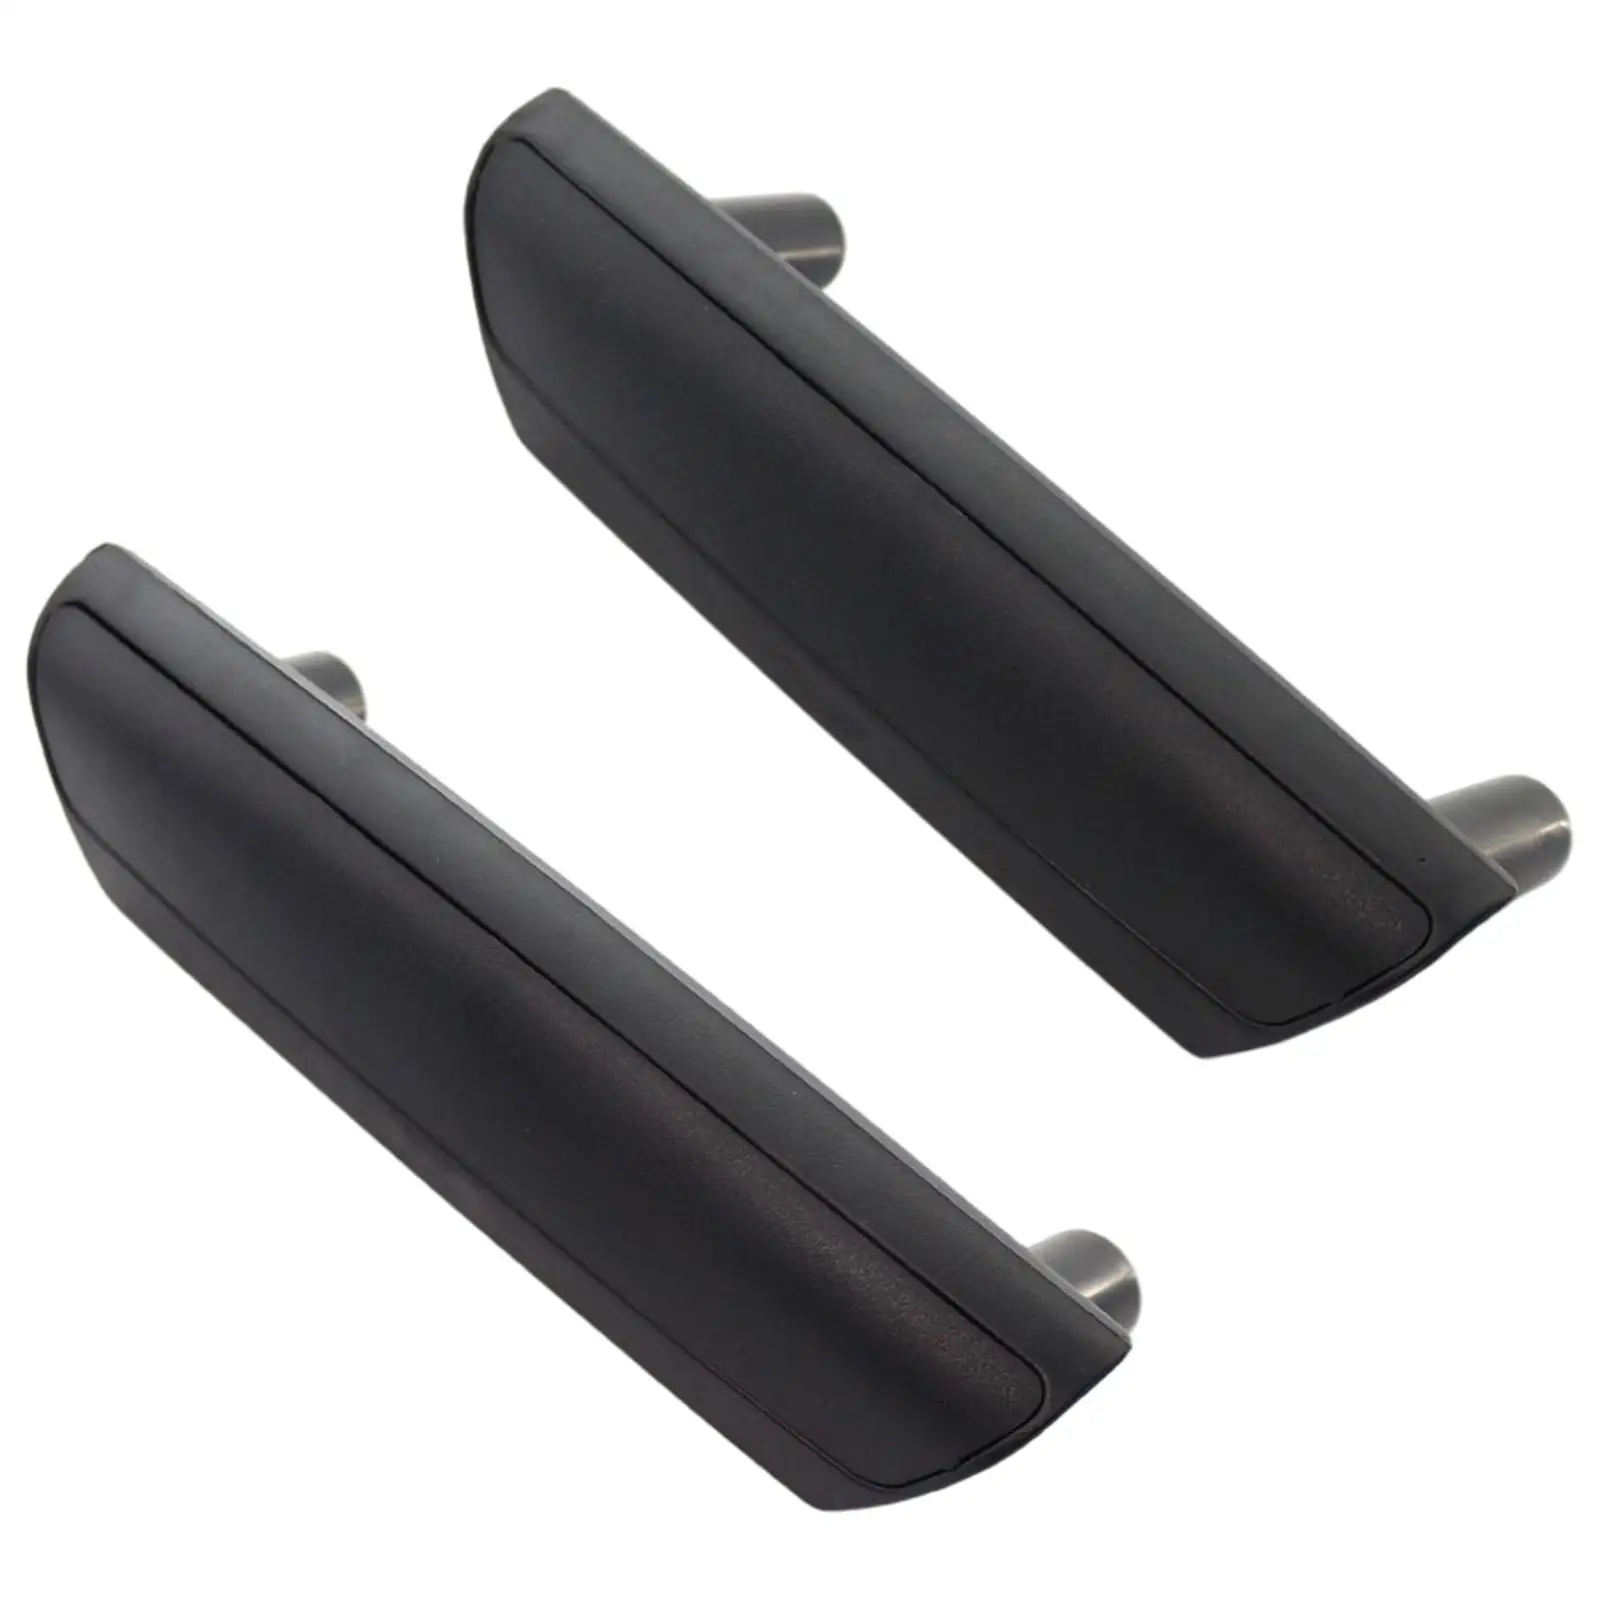 Interior Door Handle, 7H0 867 179 7H0 86  03+ Replace accessories Easy to Install